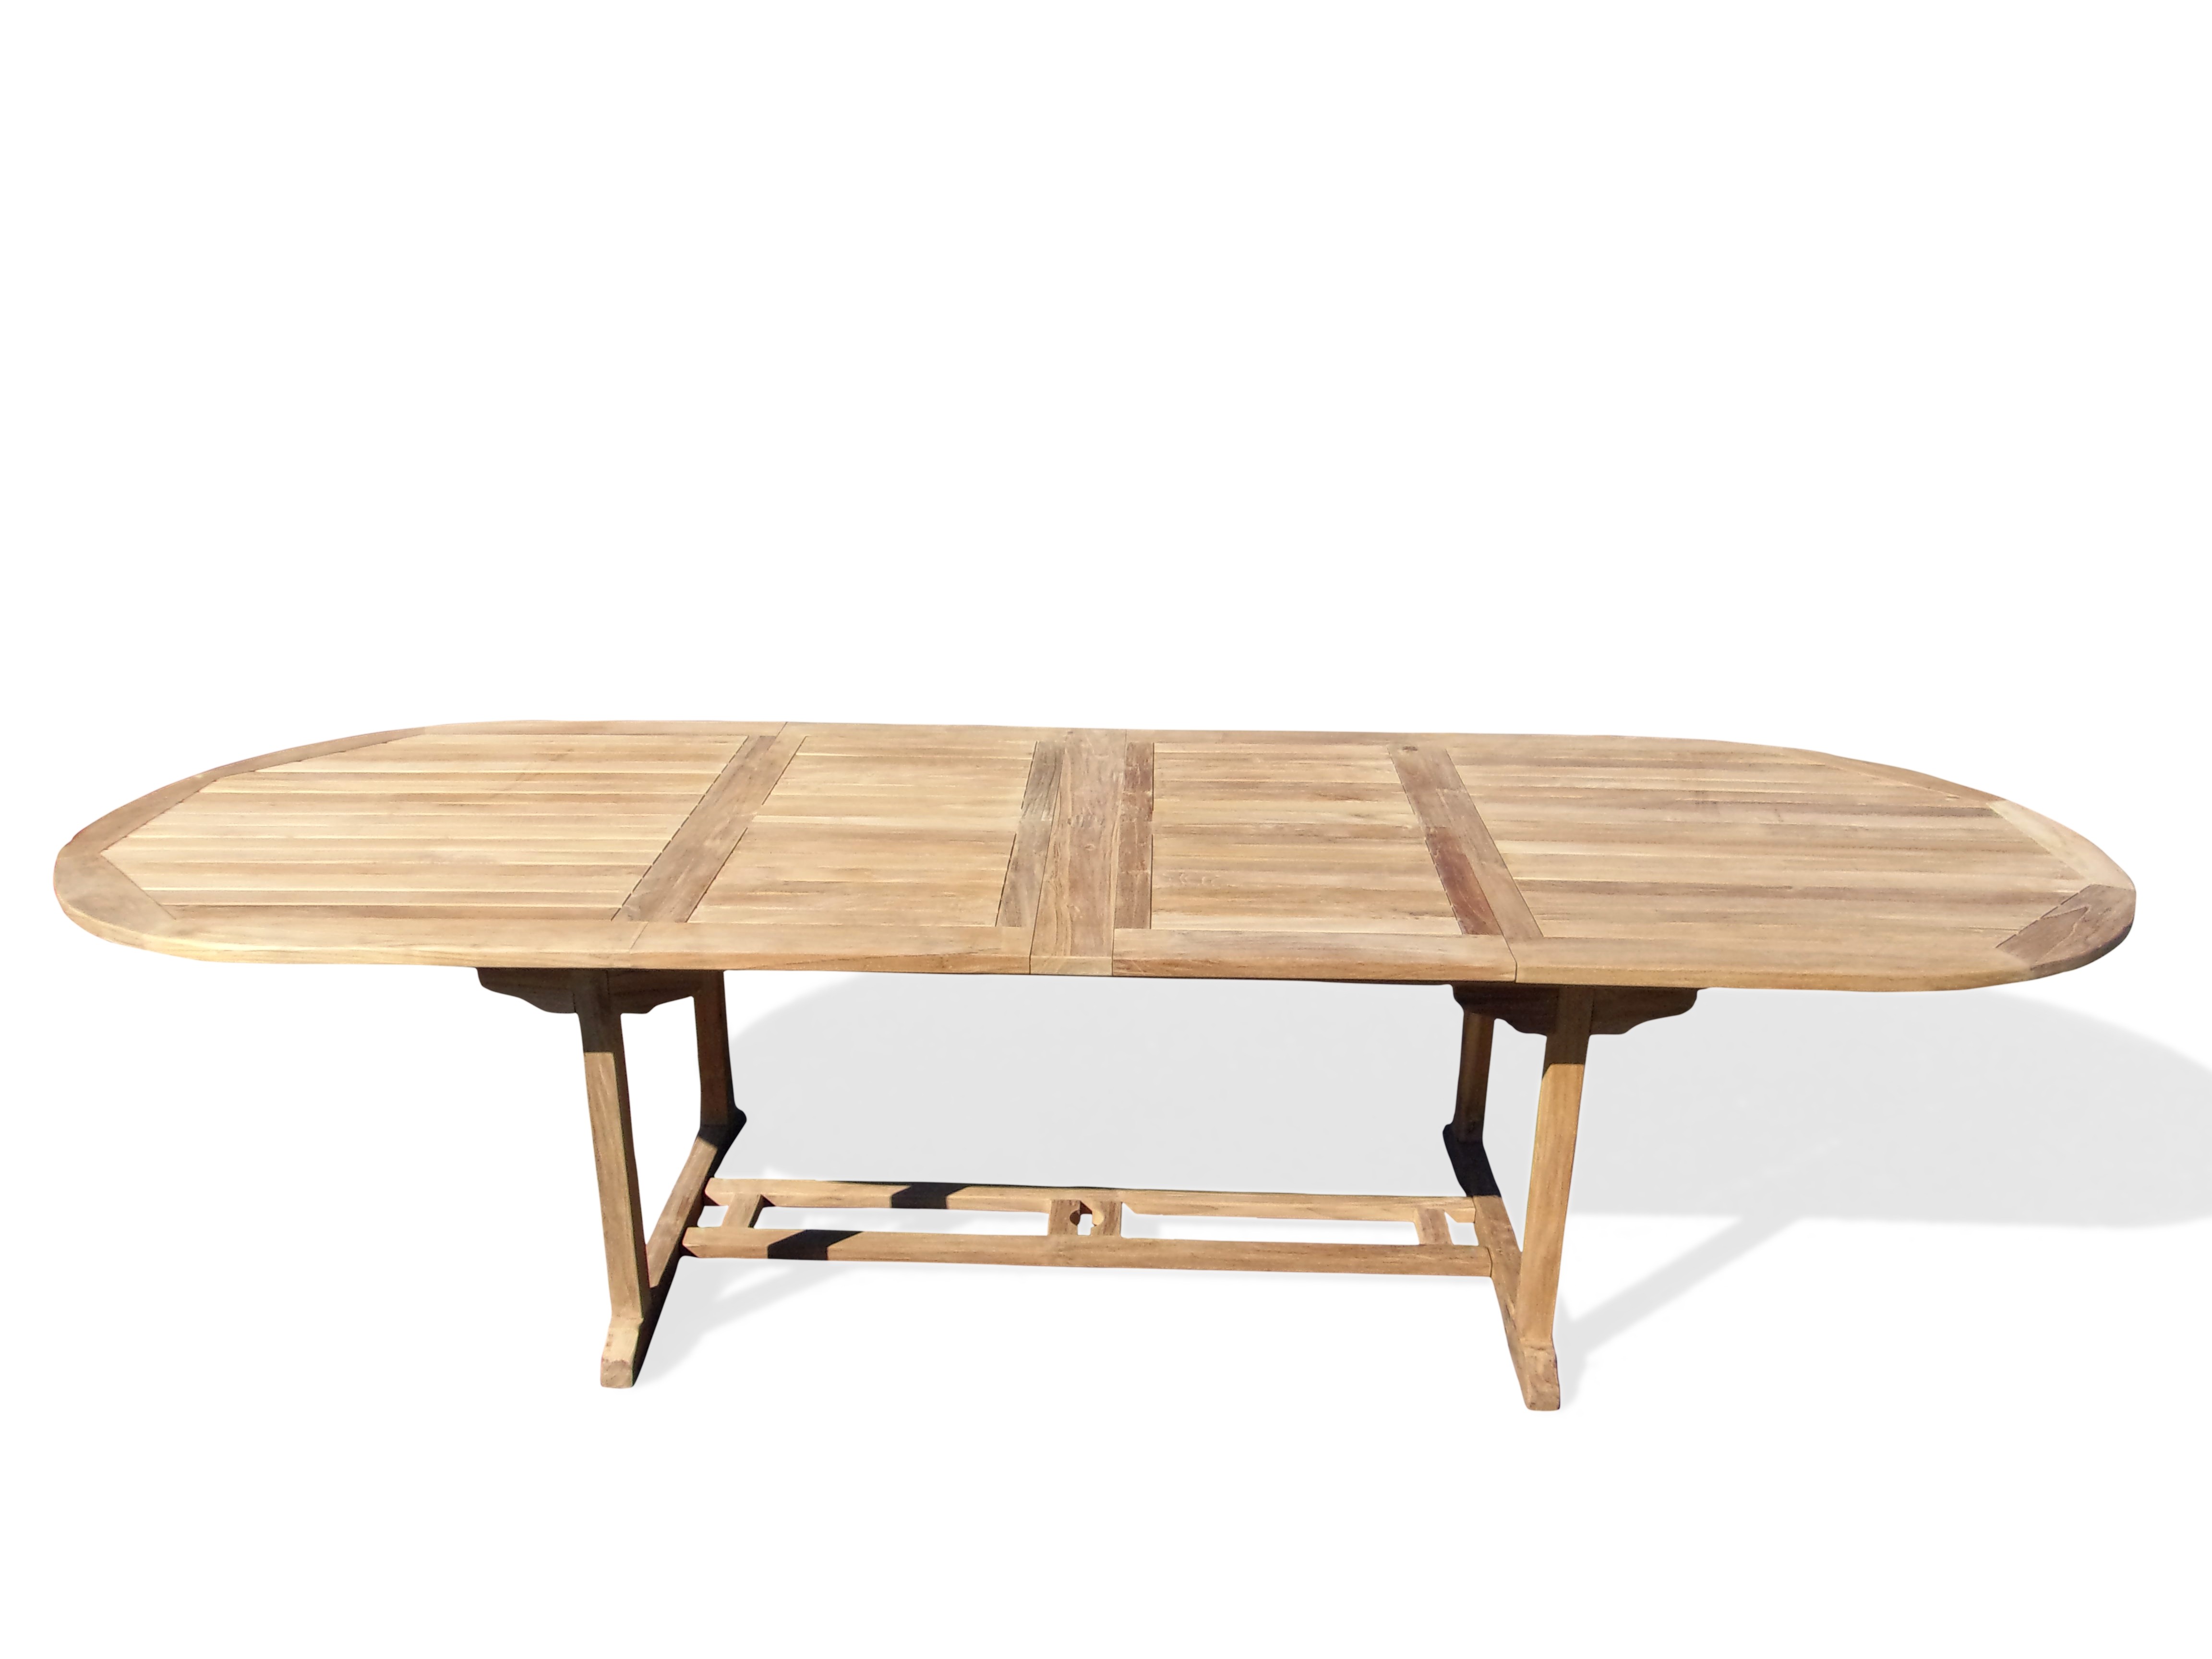 Buckingham 138" x 39" Oval Double Leaf Extension Table...(11.5 Foot Long Table) Seats 12-14 Adults....makes 3 Different Size Tables